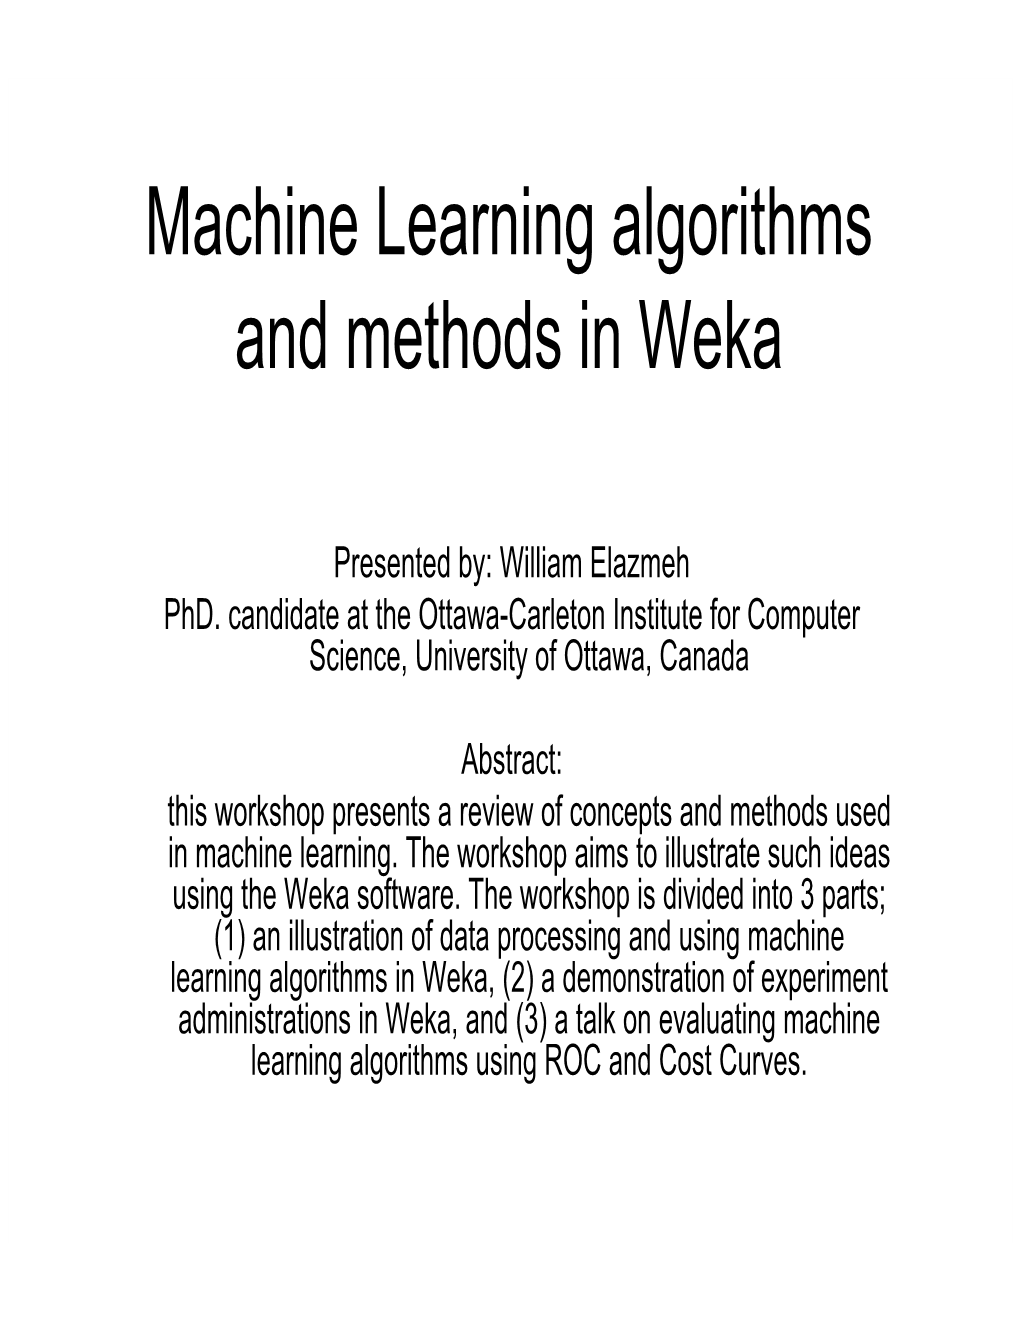 Machine Learning Algorithms and Methods in Weka